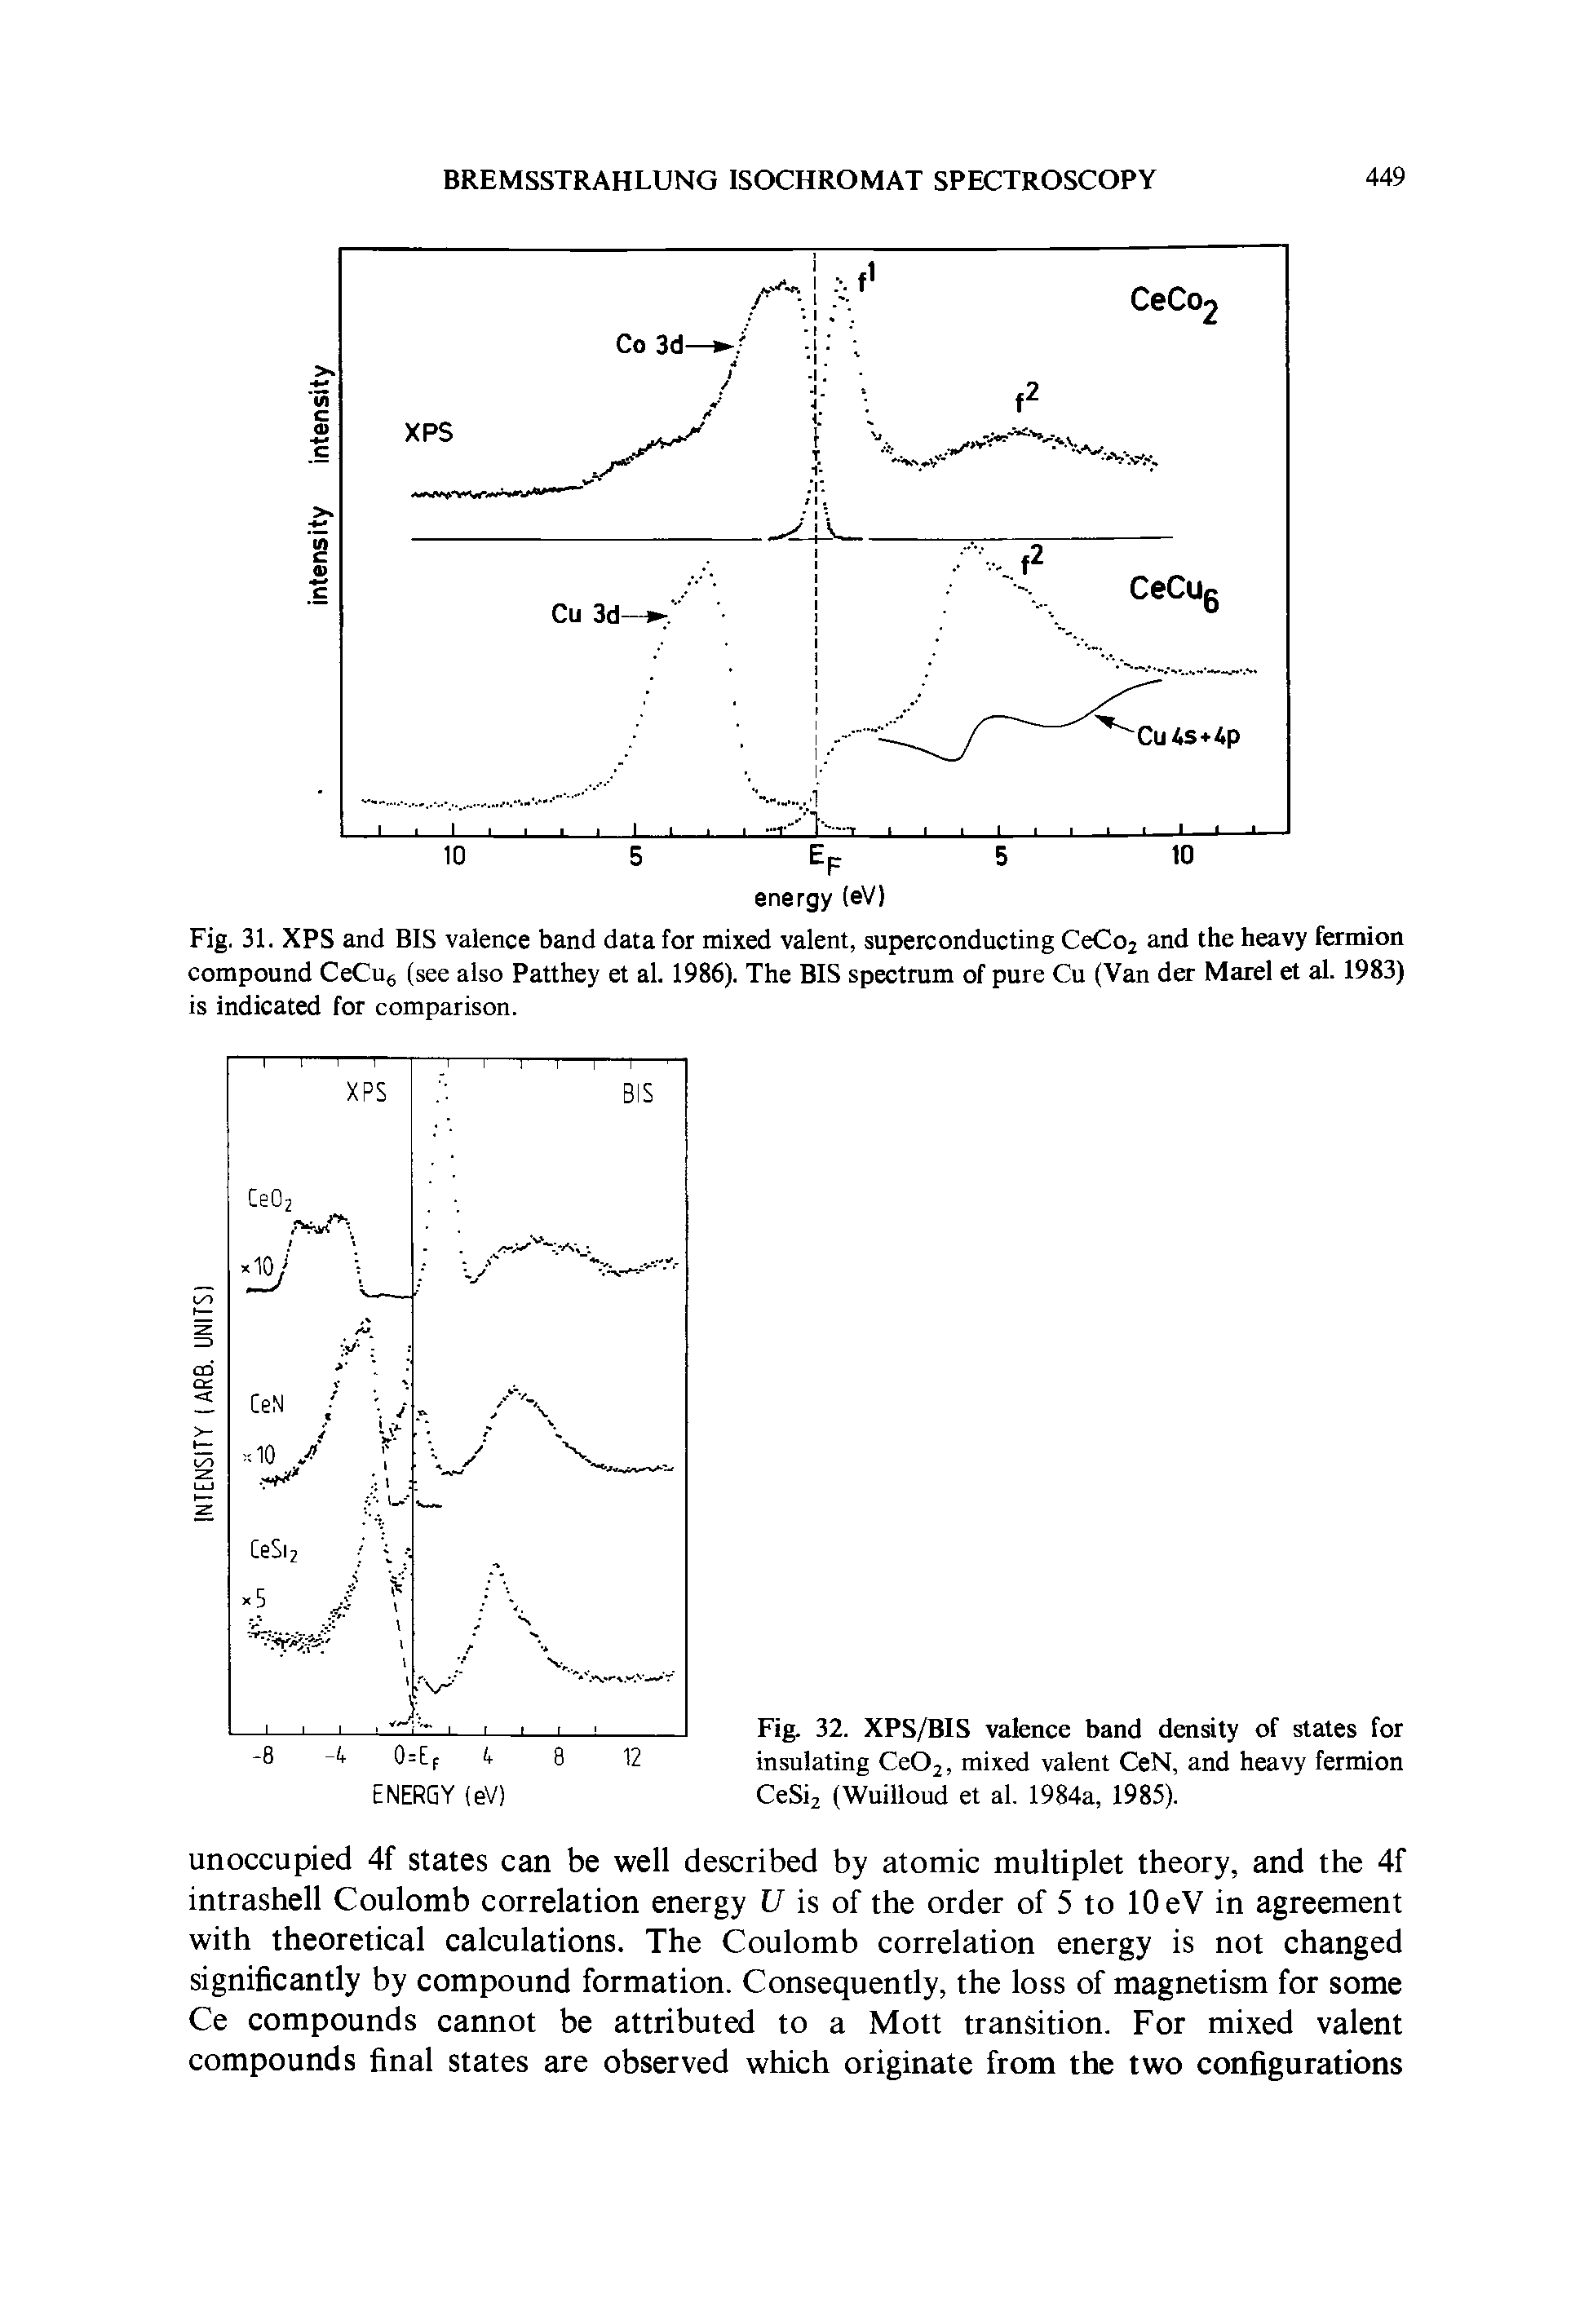 Fig. 32. XPS/BIS valence band density of states for insulating Ce02, mixed valent CeN, and heavy fermion CeSi2 (Wuilloud et al. 1984a, 1985).